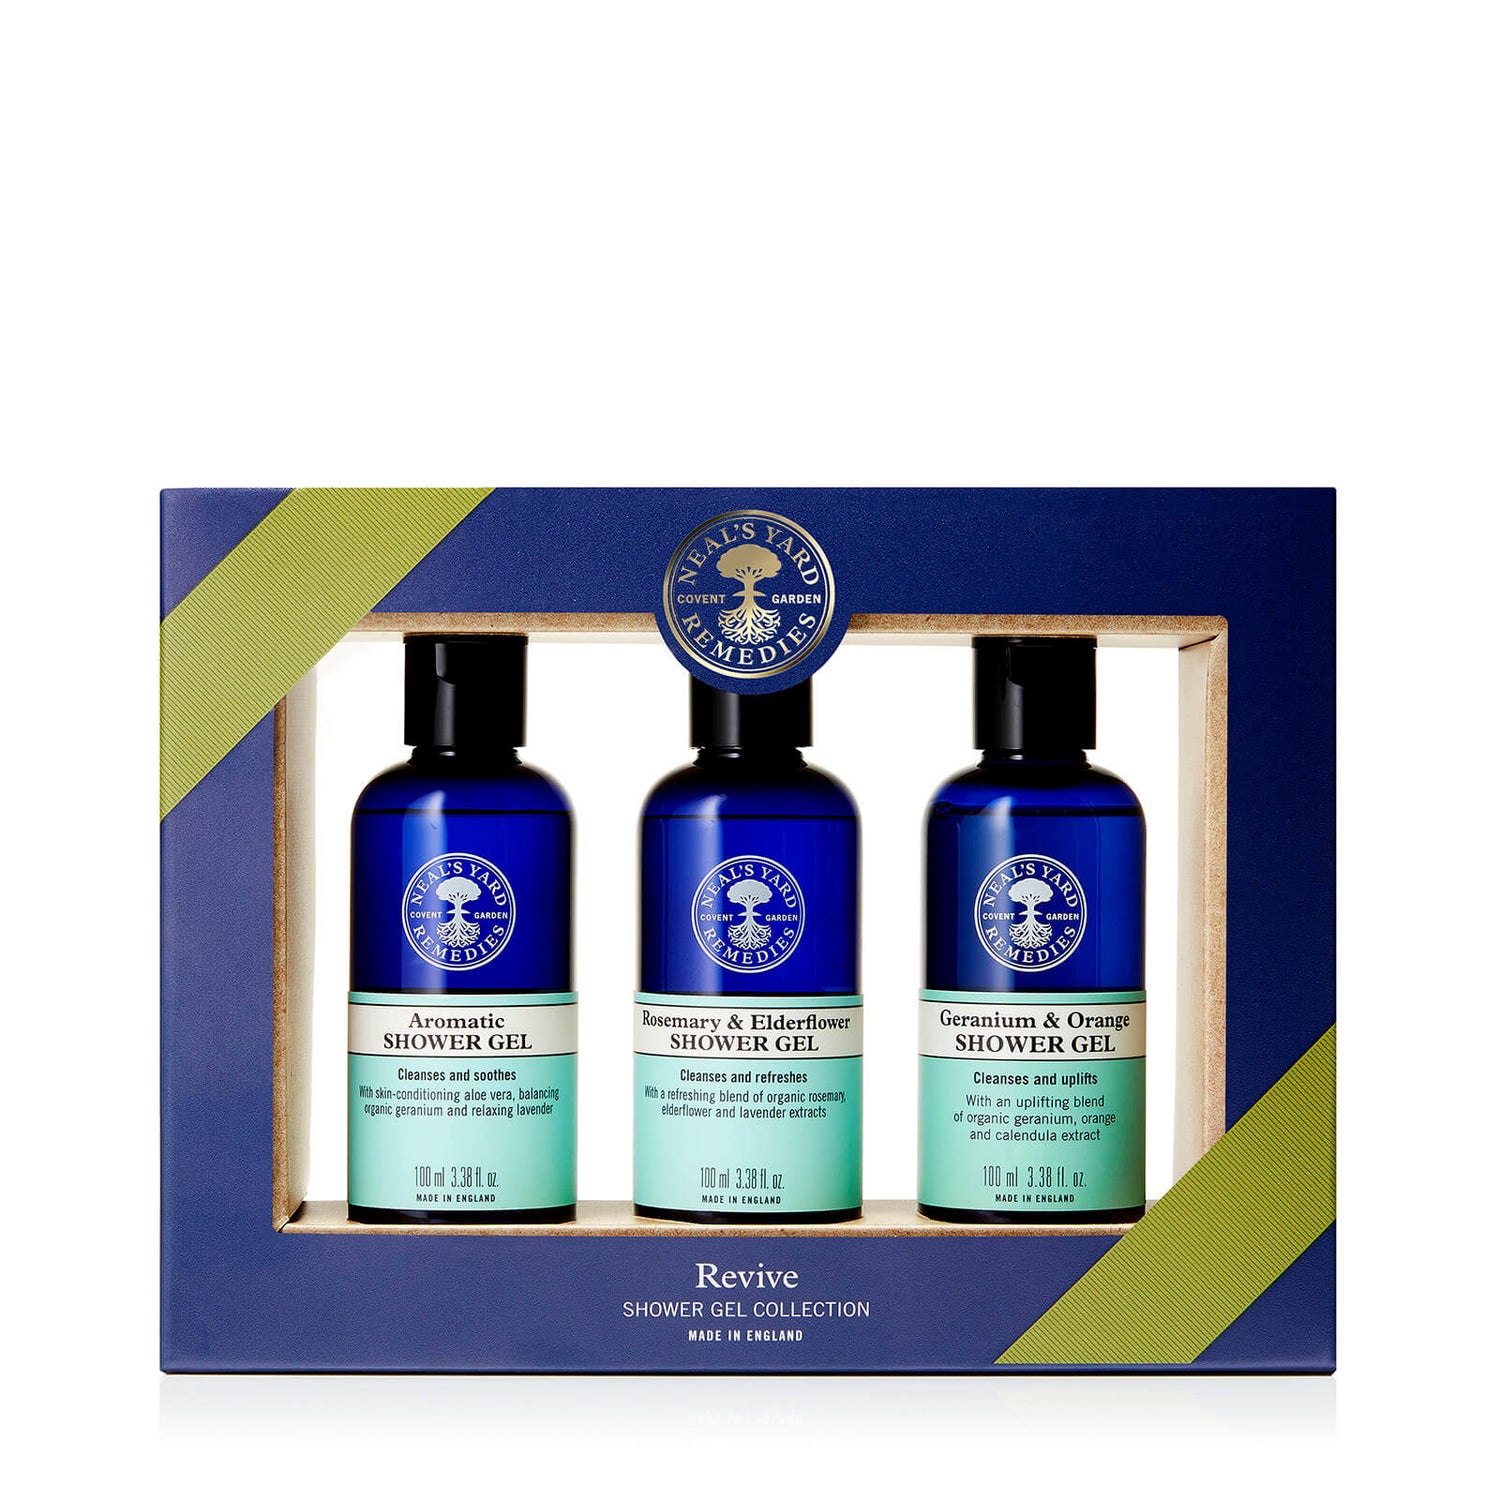 Neal's Yard Remedies Revive Shower Gel Collection (Worth £21.00)